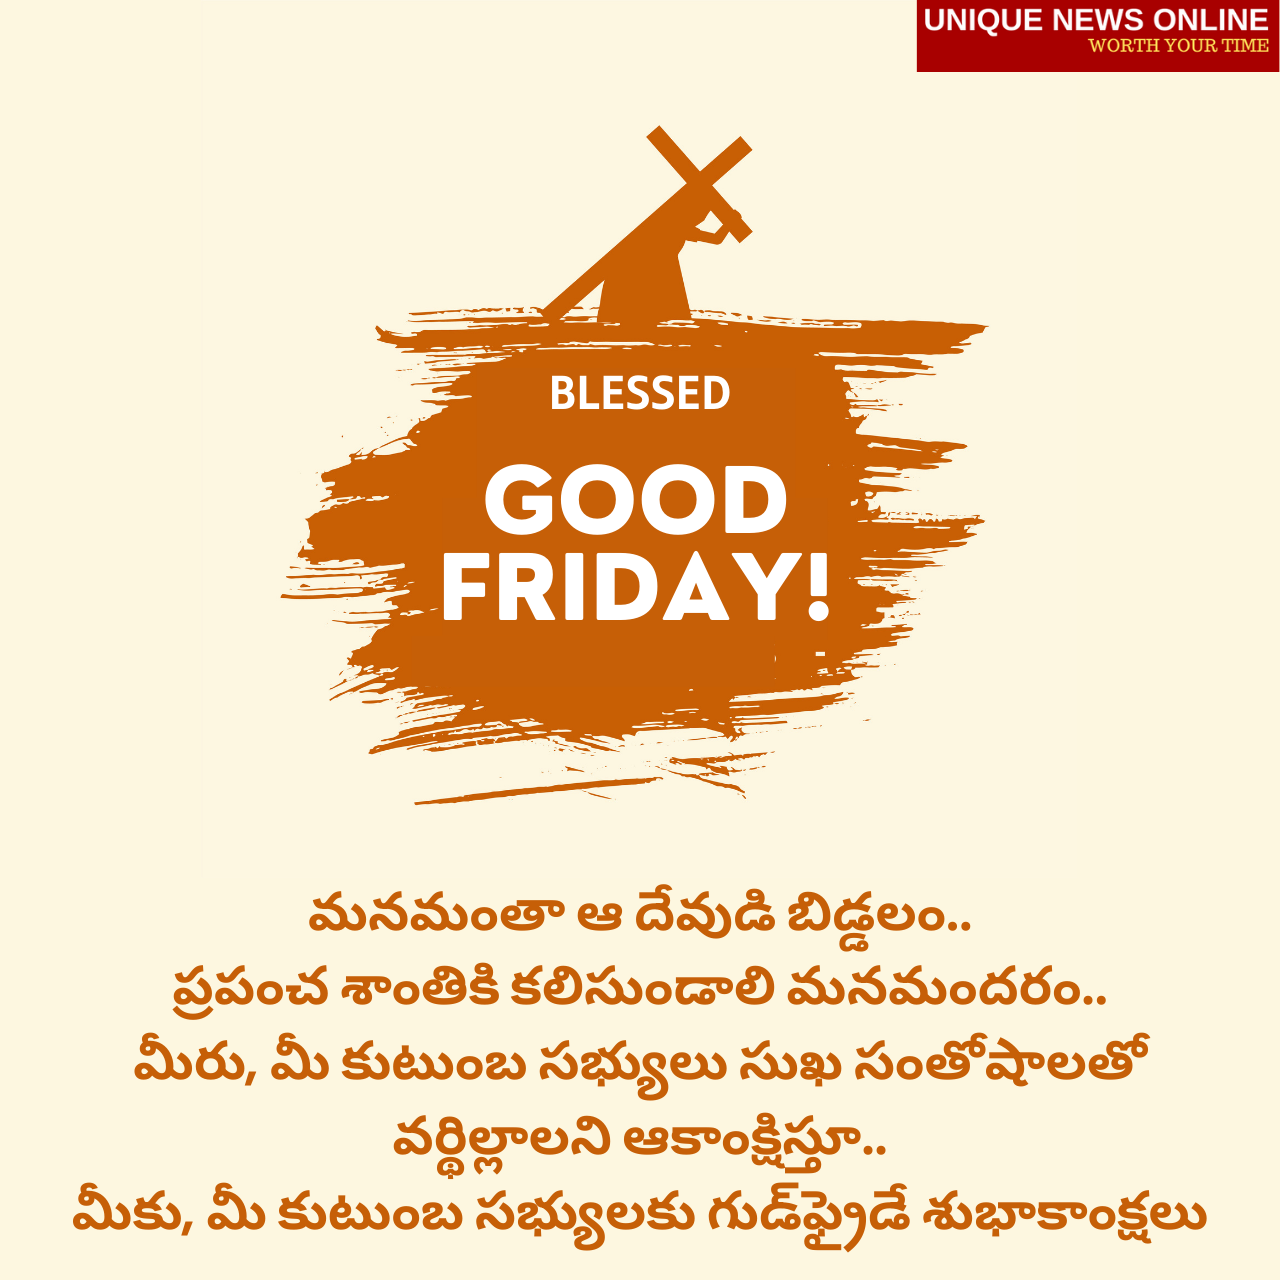 Good Friday 2021 Wishes in Telugu, Messages, Greetings, Quotes, and Images to Share